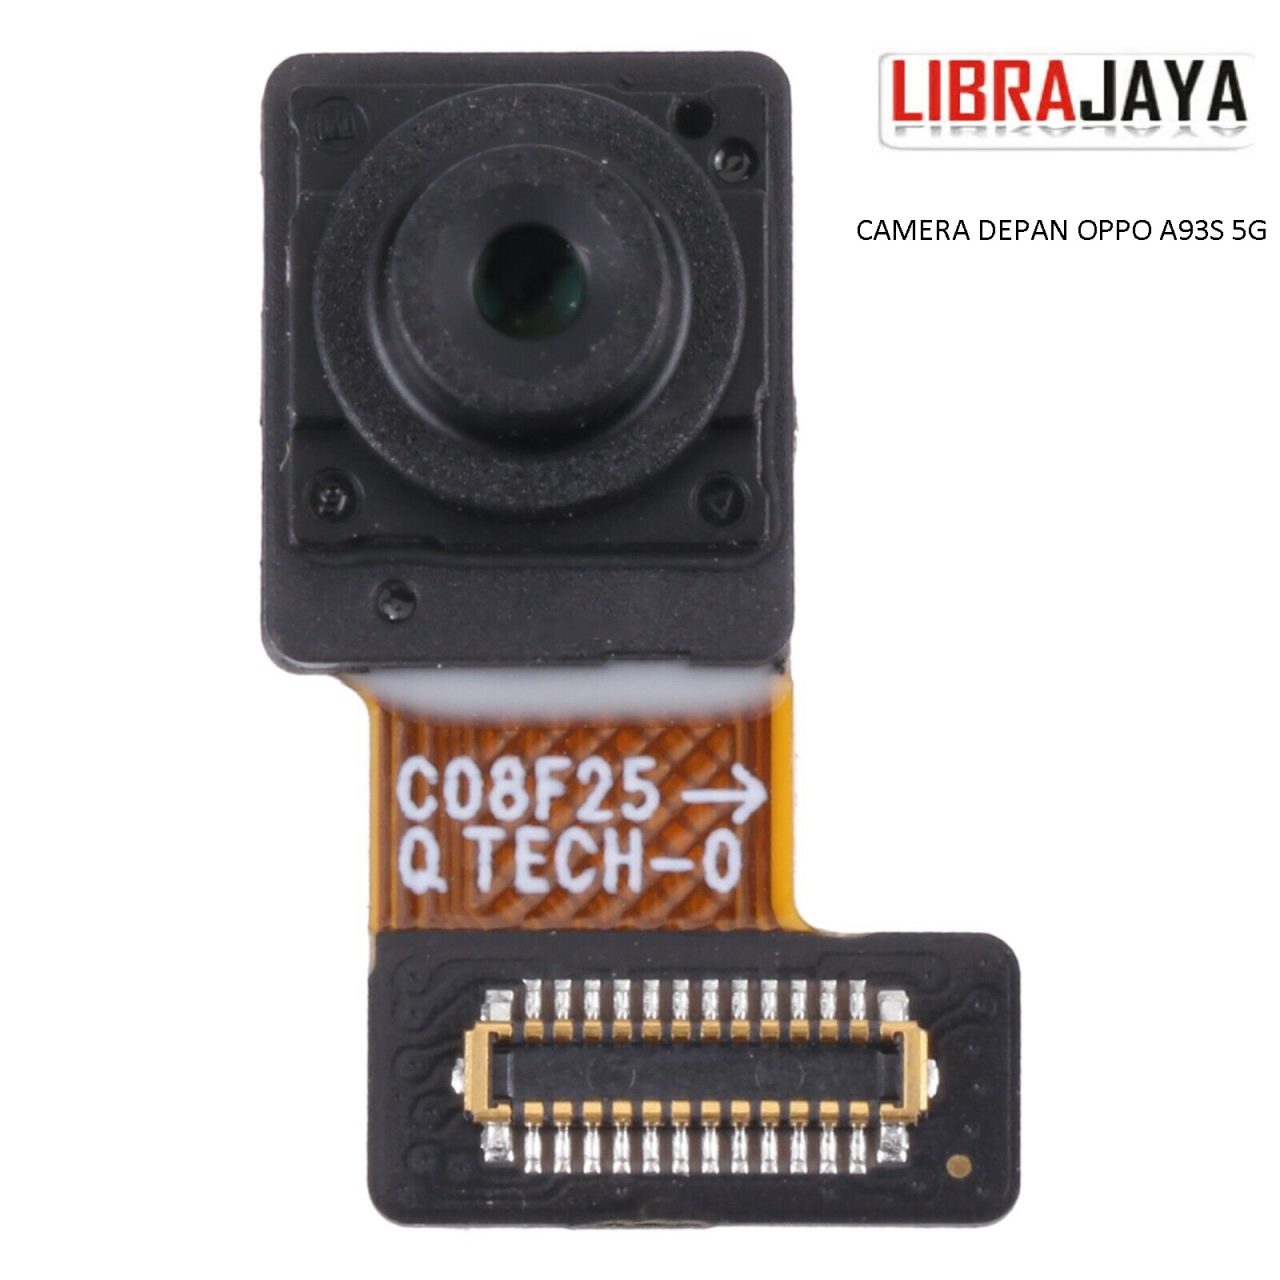 CAMERA SMALL FRONT KAMERA DEPAN OPPO A93S 5G